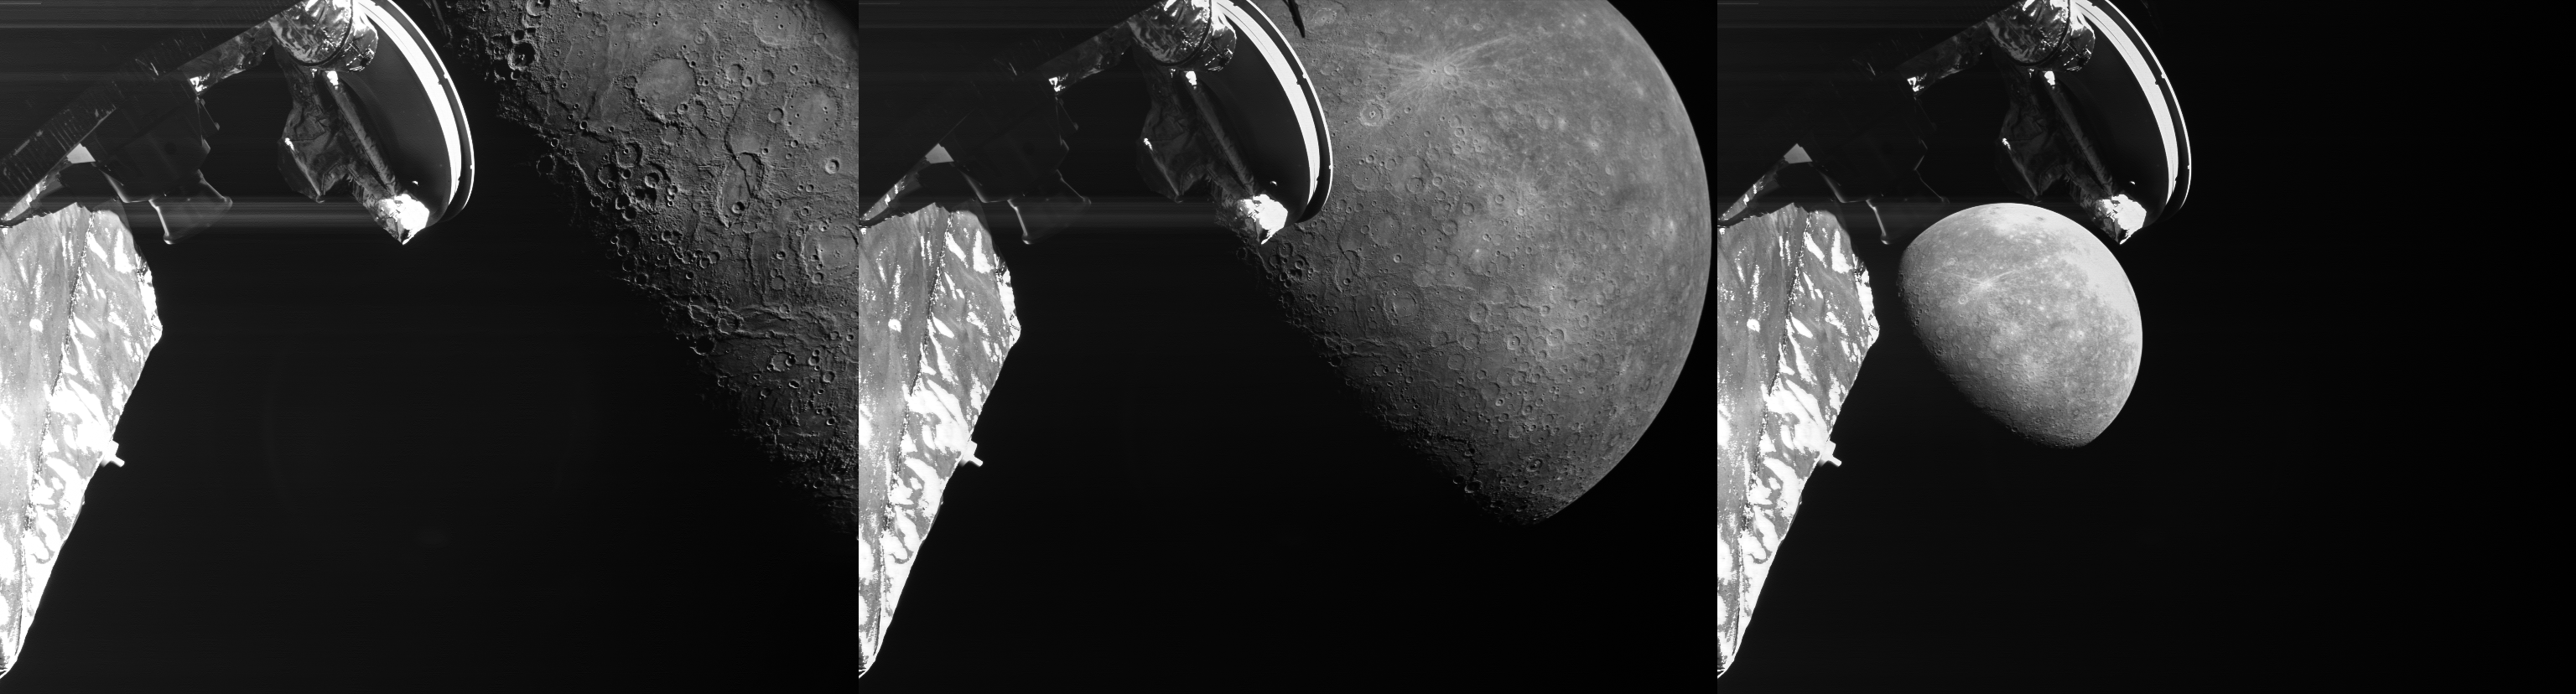 ESA released a trio of images from BepiColombo's recent flyby. (Image: ESA)